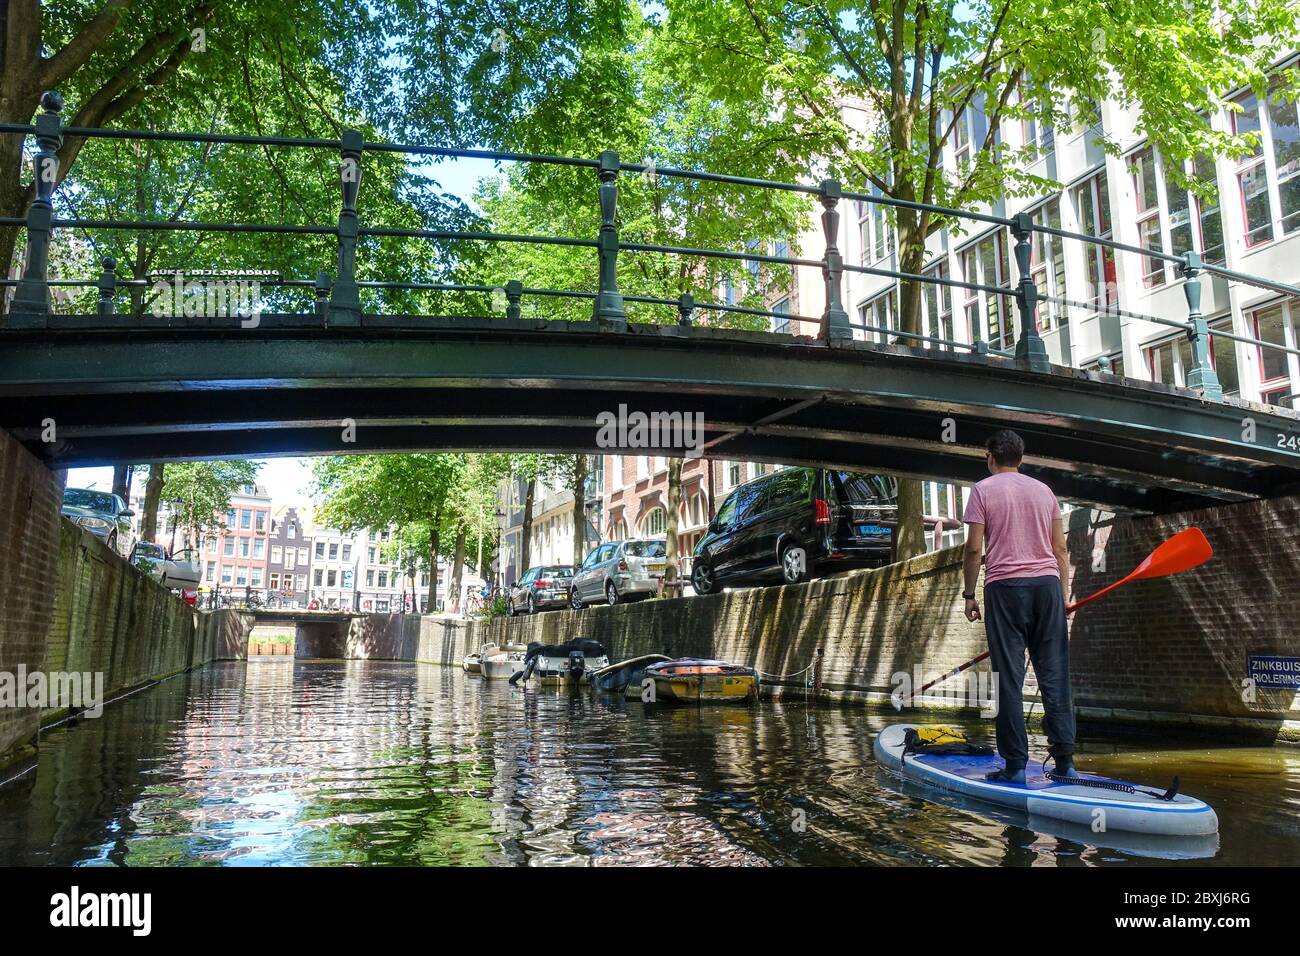 Man on a SUP (stand-up paddle board) on the canals in the center of quiet Amsterdam (Netherlands) during the Covid-19 crisis Stock Photo